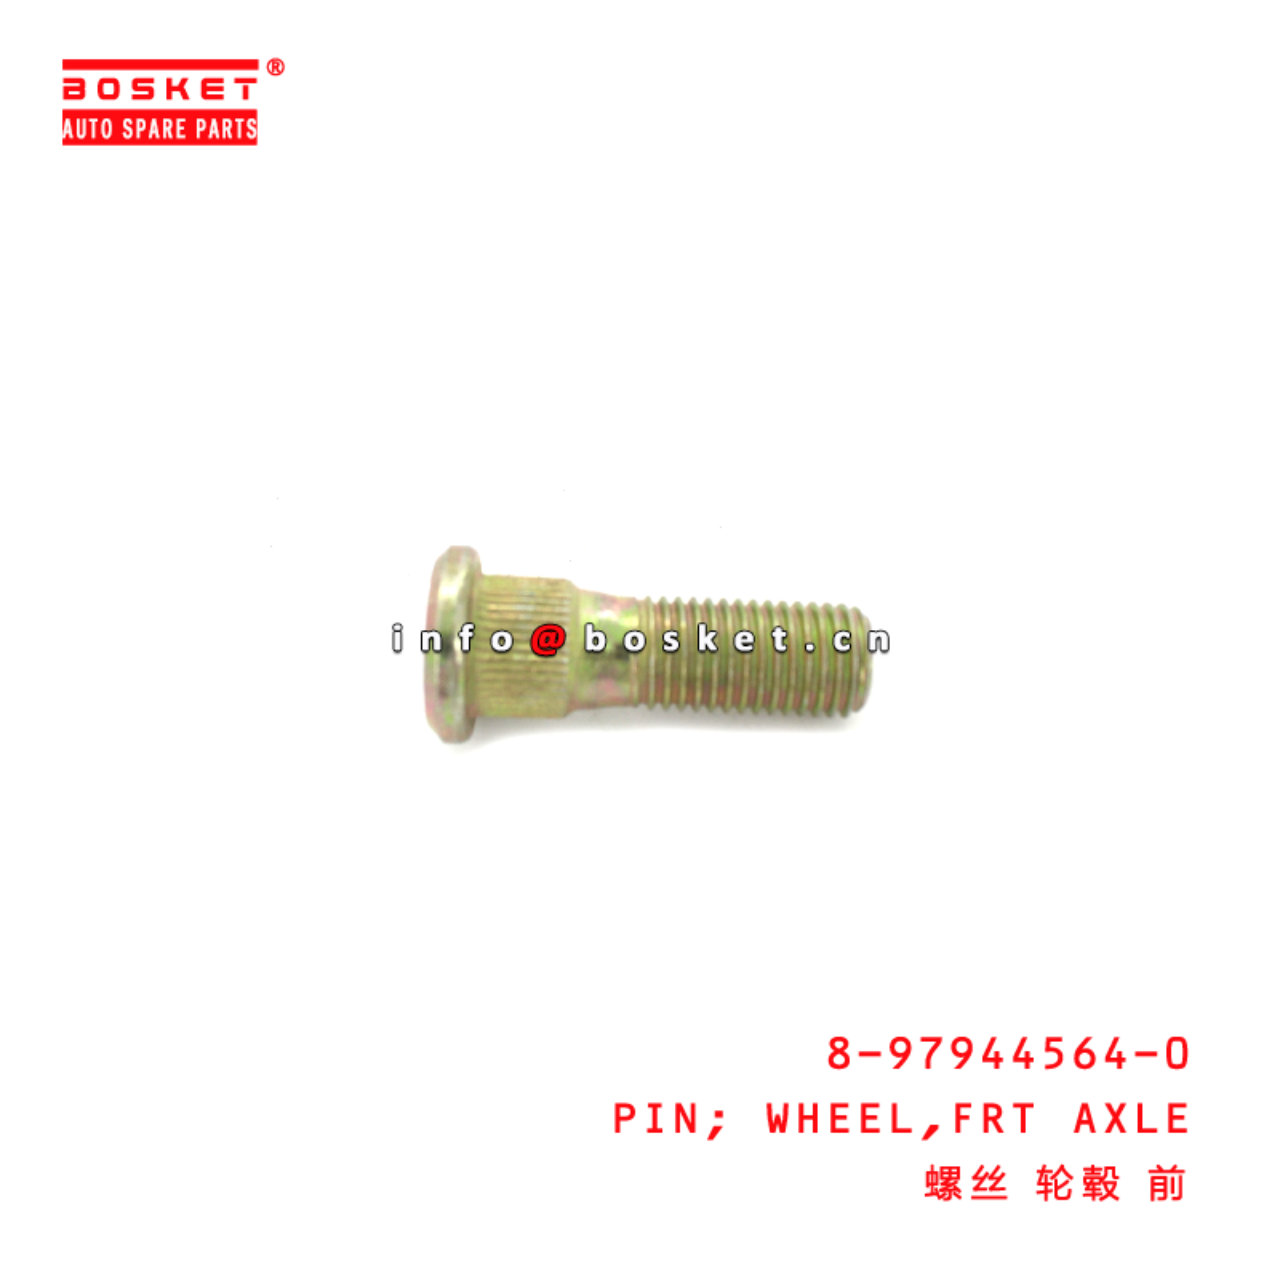 8-97944564-0 Front Axle Wheel Pin suitable for ISU...